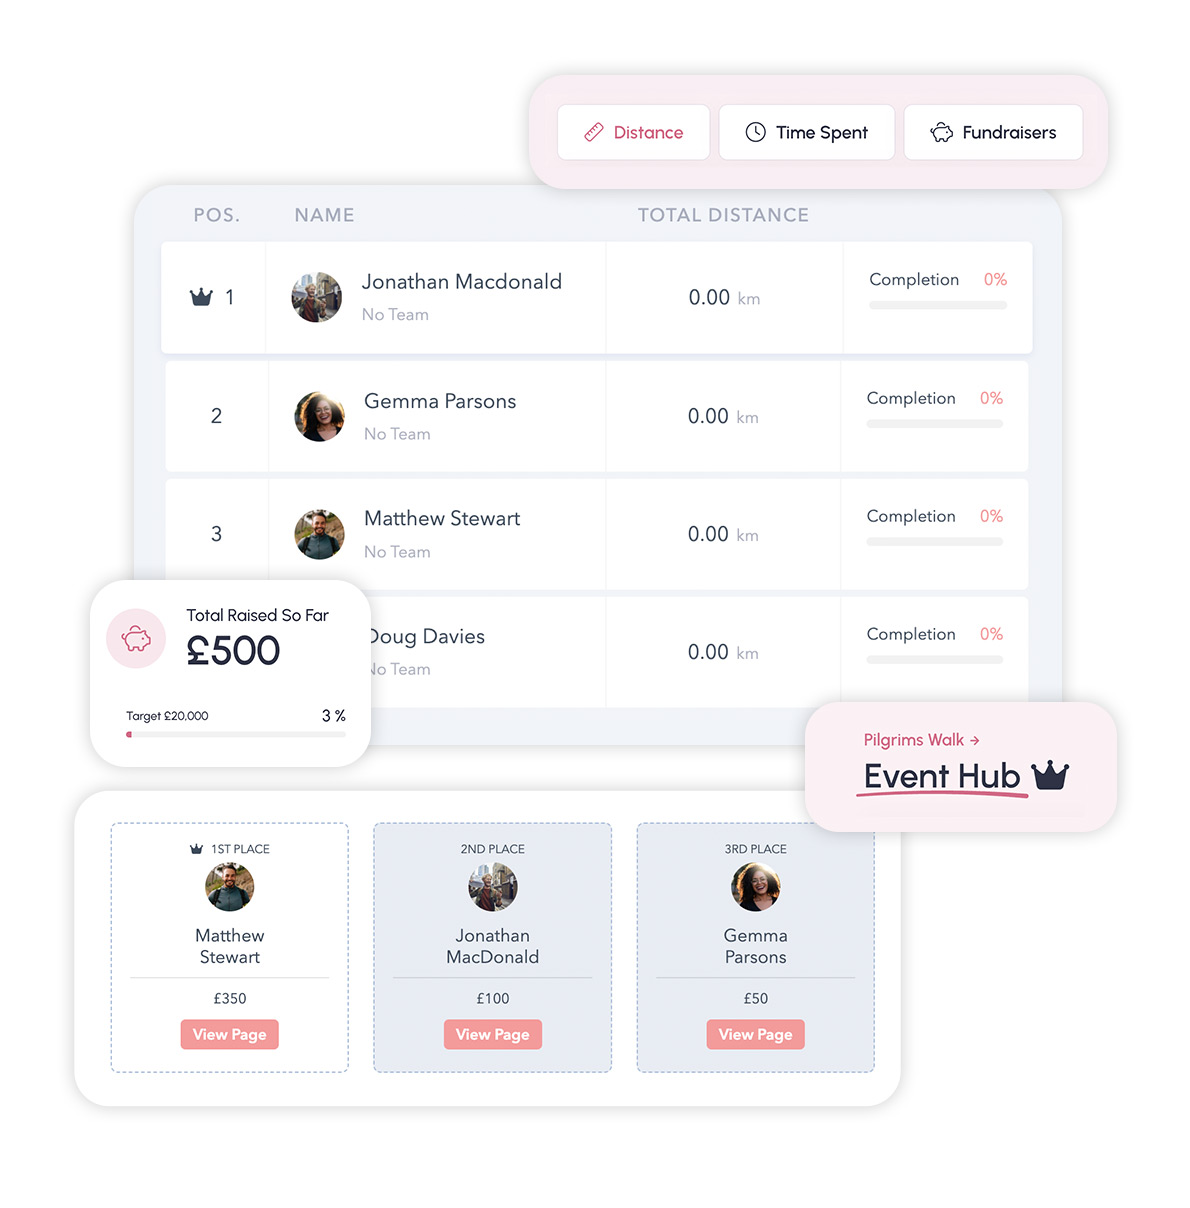 Event Hub enables leaderboards for fundraising, distance, time and more